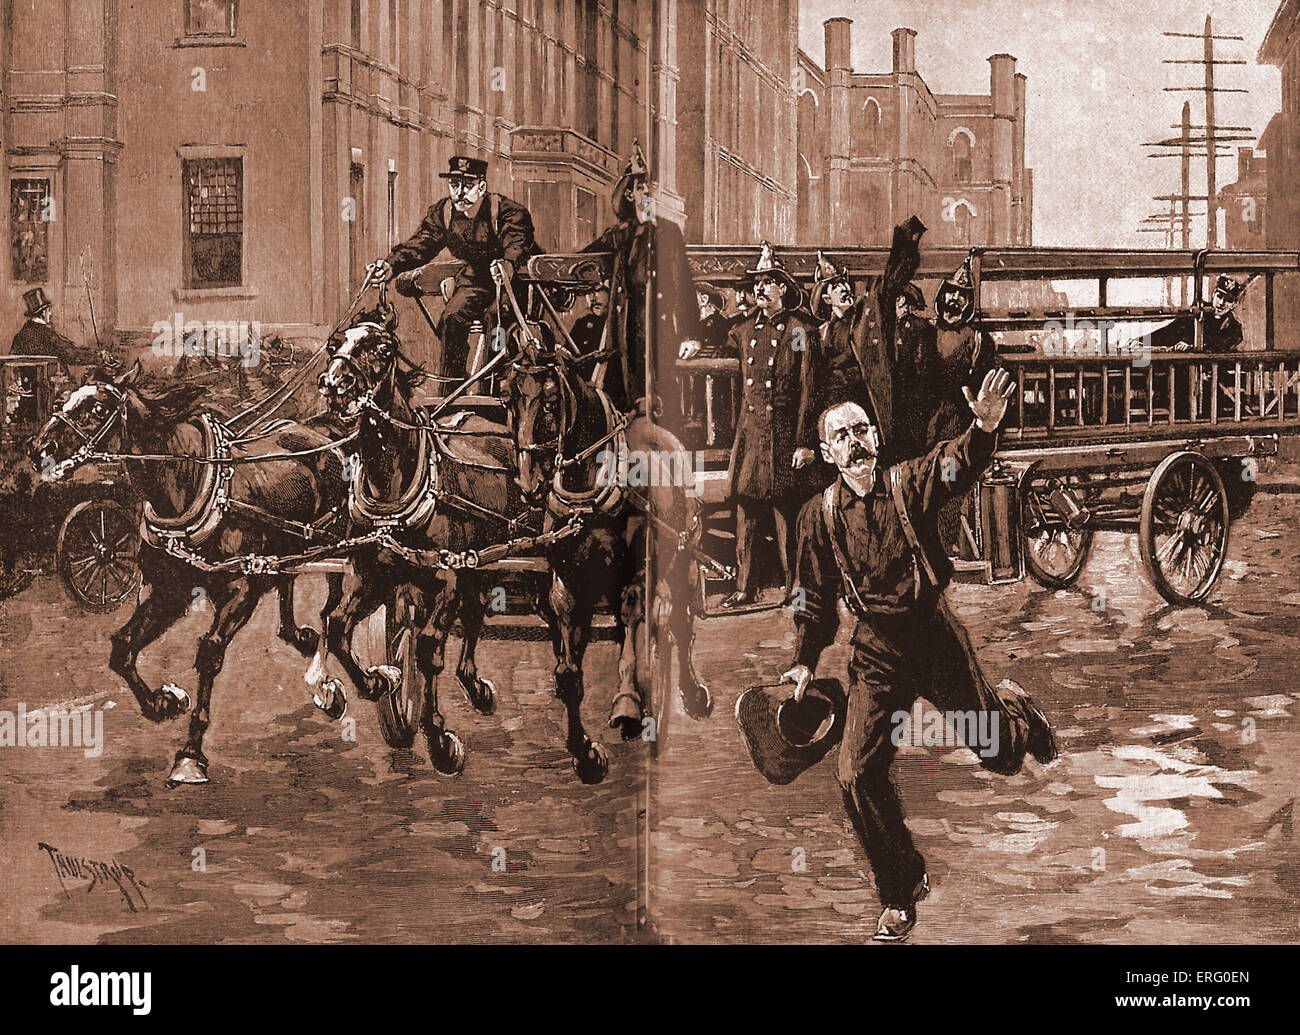 A hook and ladder company in the 1890s. Firefighters rush to a fire in New York. Illustration by Thure de Thulstrup in Harper's Stock Photo